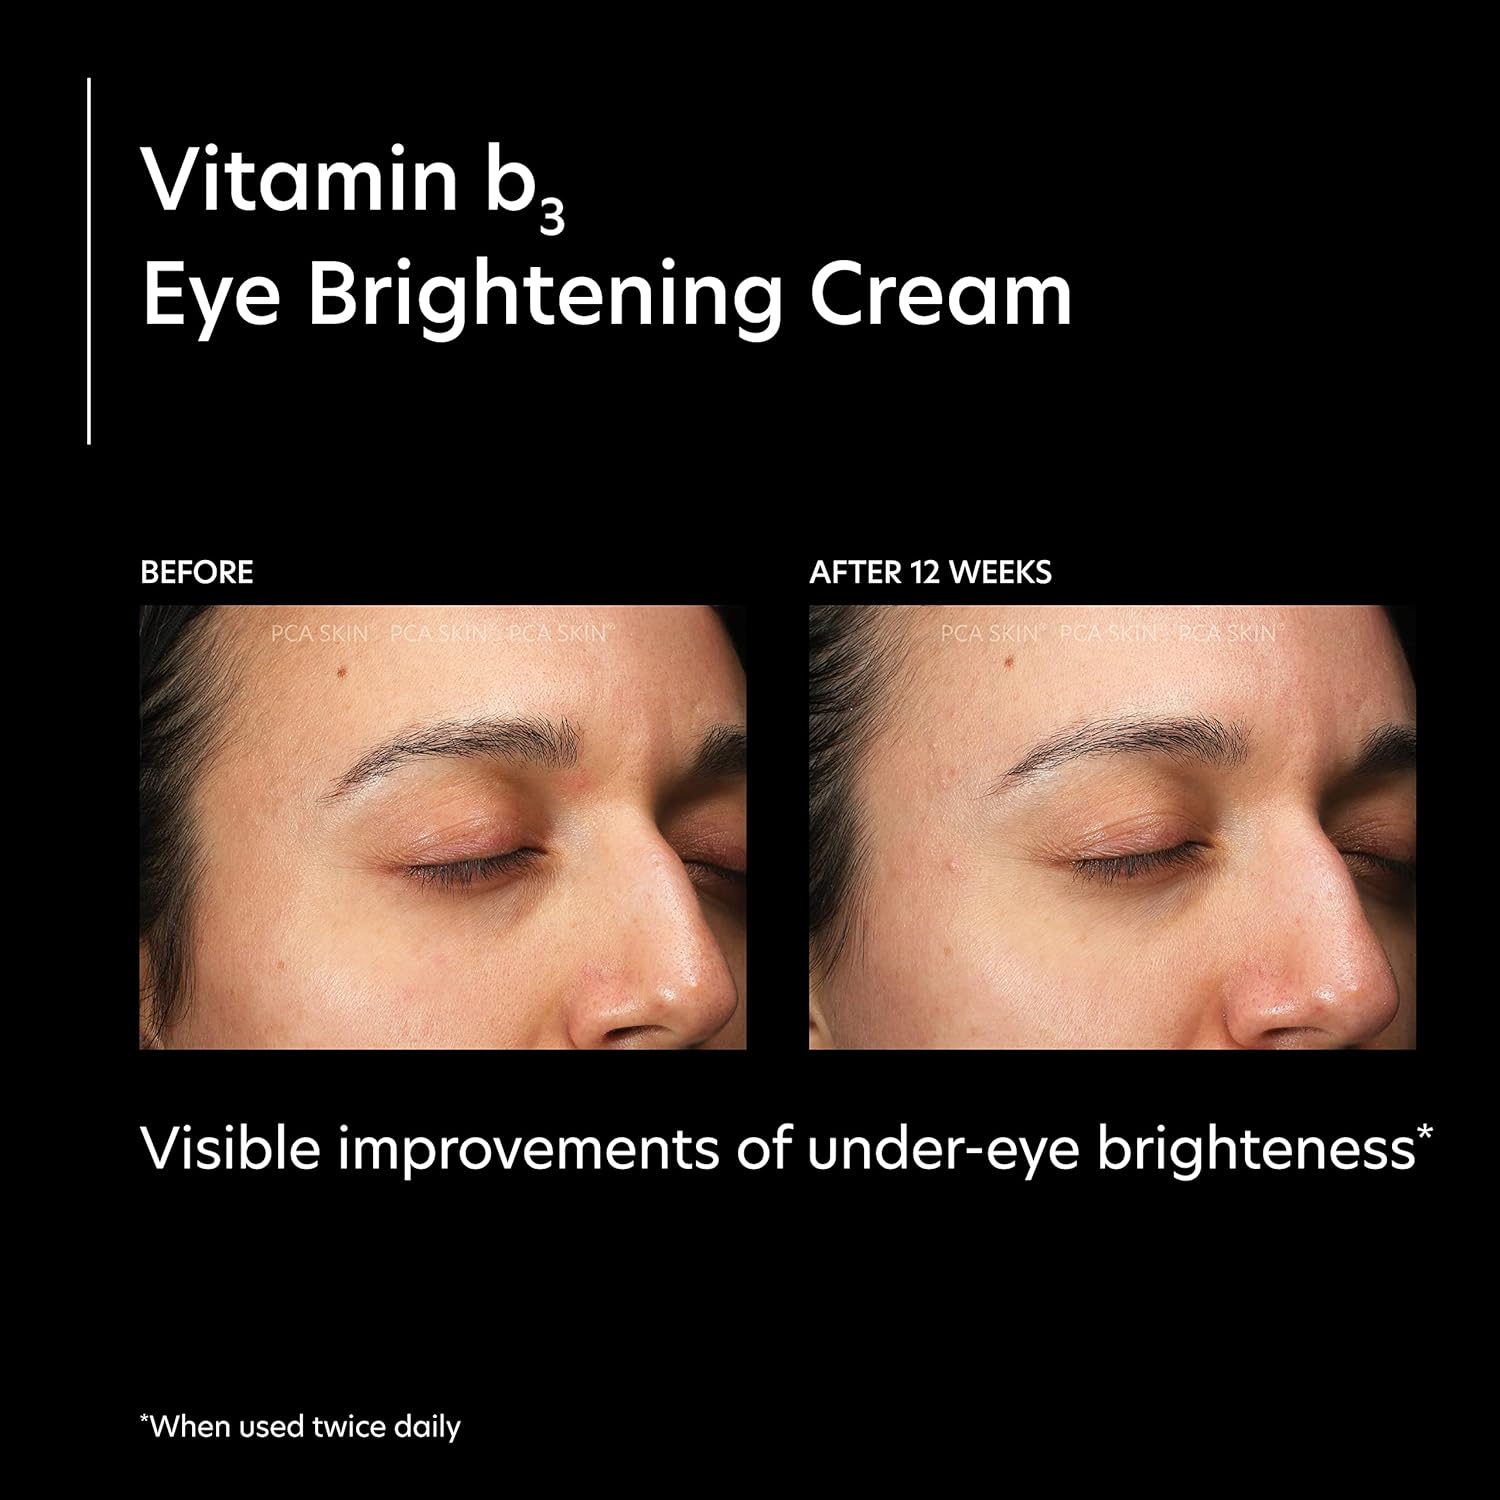 PCA SKIN Vitamin B3 Eye Brightening Cream, Eye Brightener For Bright Eyes, Dark Circles, Wrinkles, and Uneven Skin Tones, Anti Aging Eye Cream, Formulated with Niacinamide, 1 oz Tube : Beauty & Personal Care